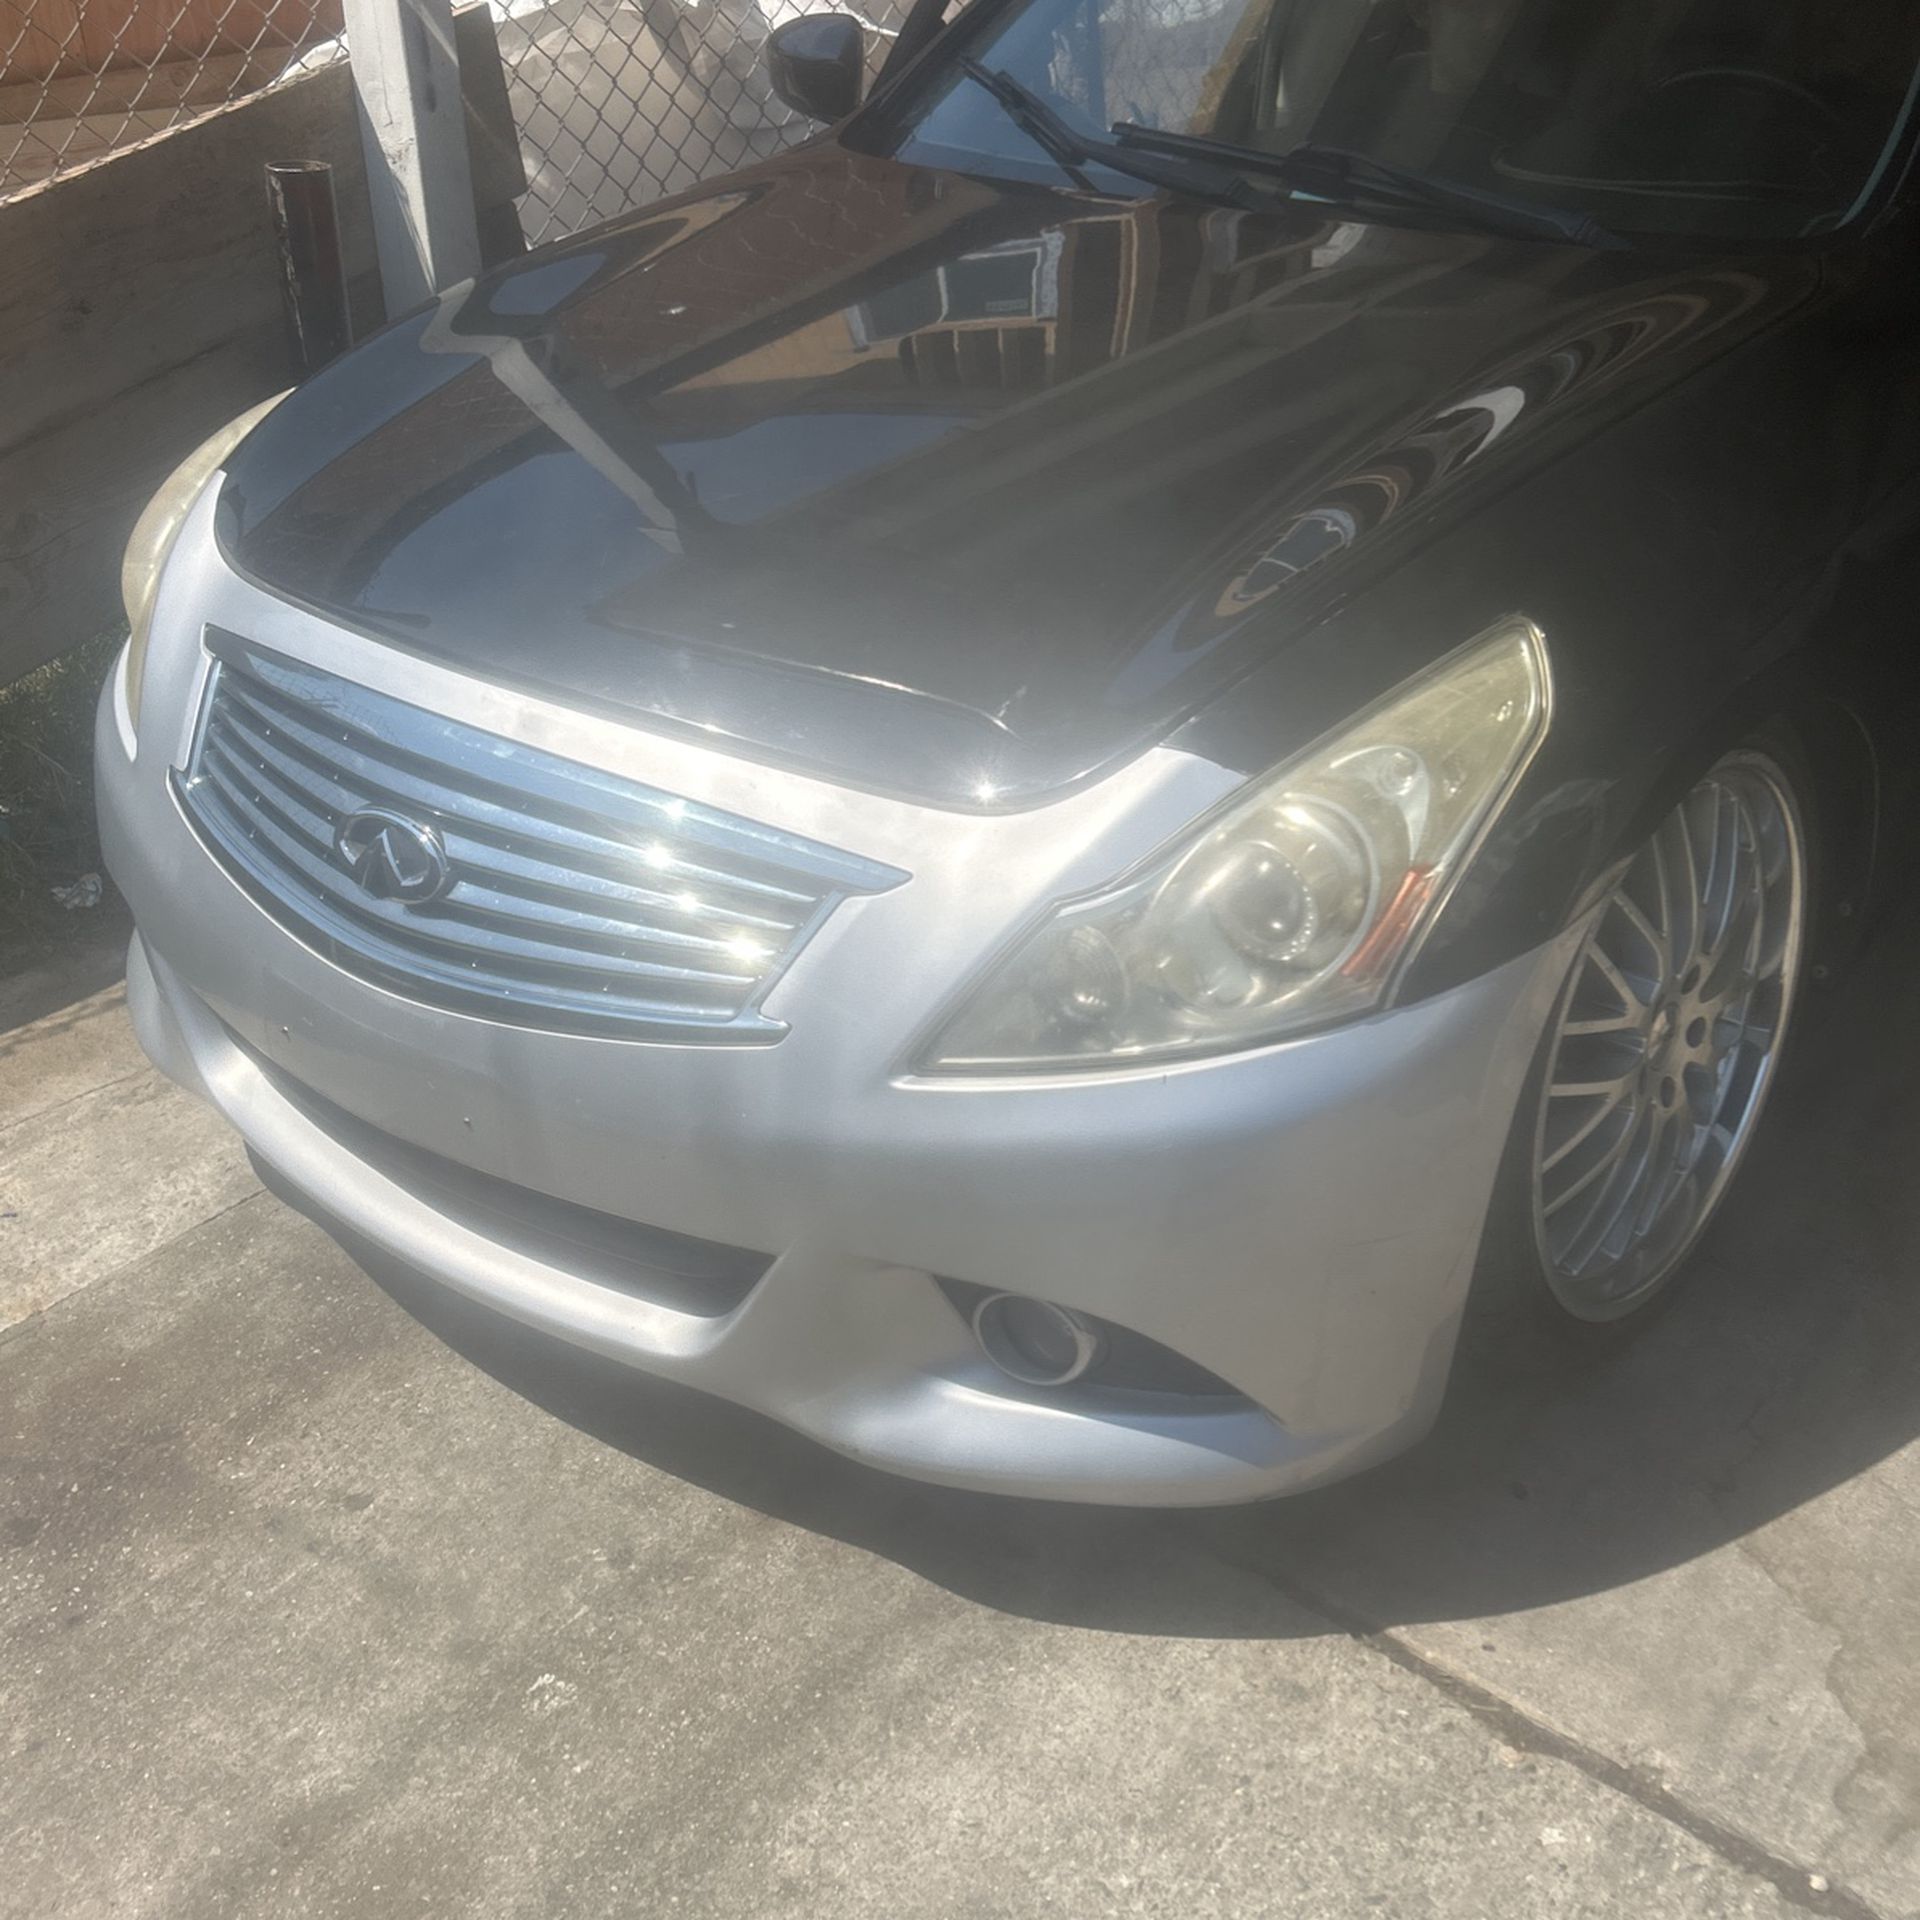 2010 Infiniti G37/35 Part Out 